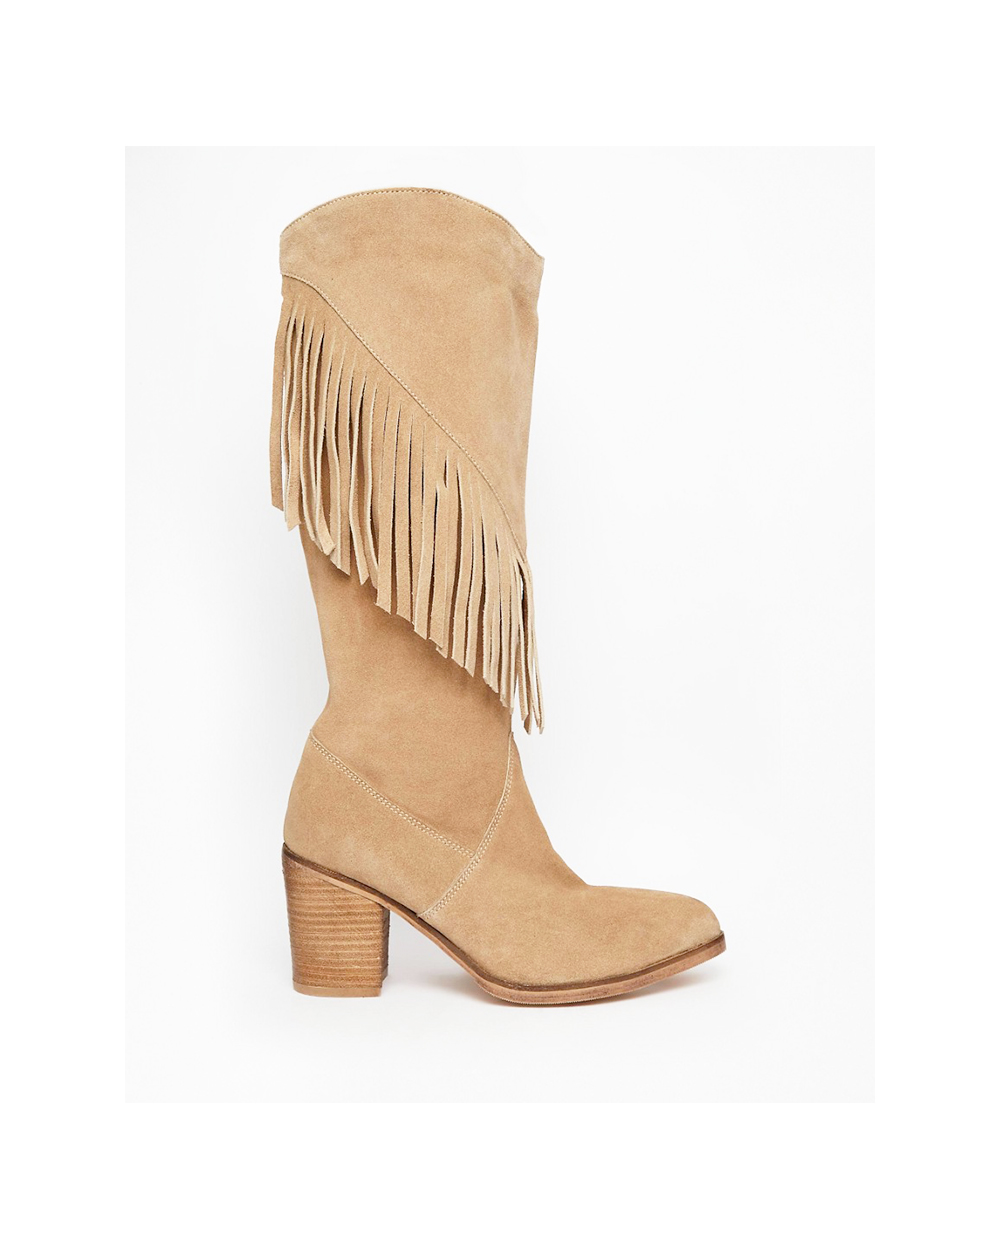 Suede Fringe Boots, $156.81, from ASOS